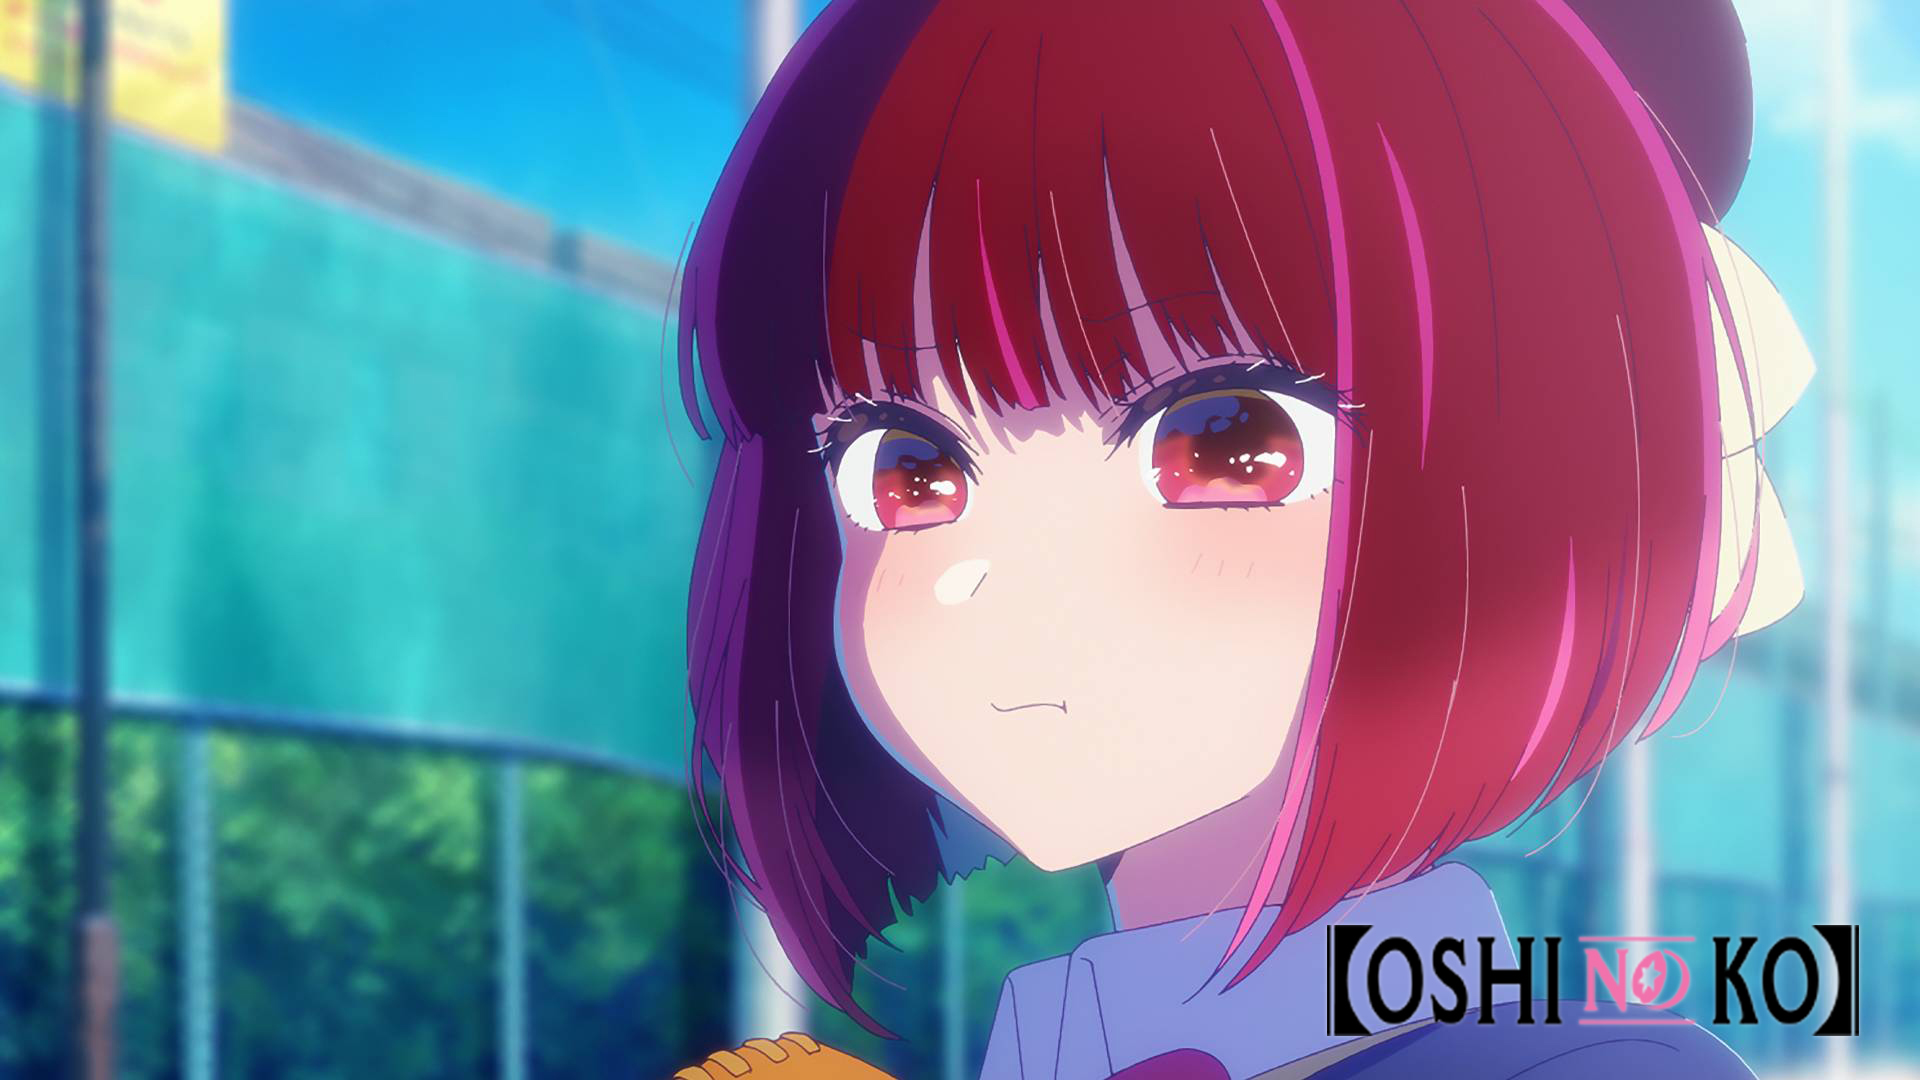 OSHI NO KO】Global on X: 🌟【OSHI NO KO】Episode 8 Now Simulcasting 🌟 Thank  you for waiting! The next episode is now available for streaming. Share  with us your thoughts with #OSHINOKO!  /